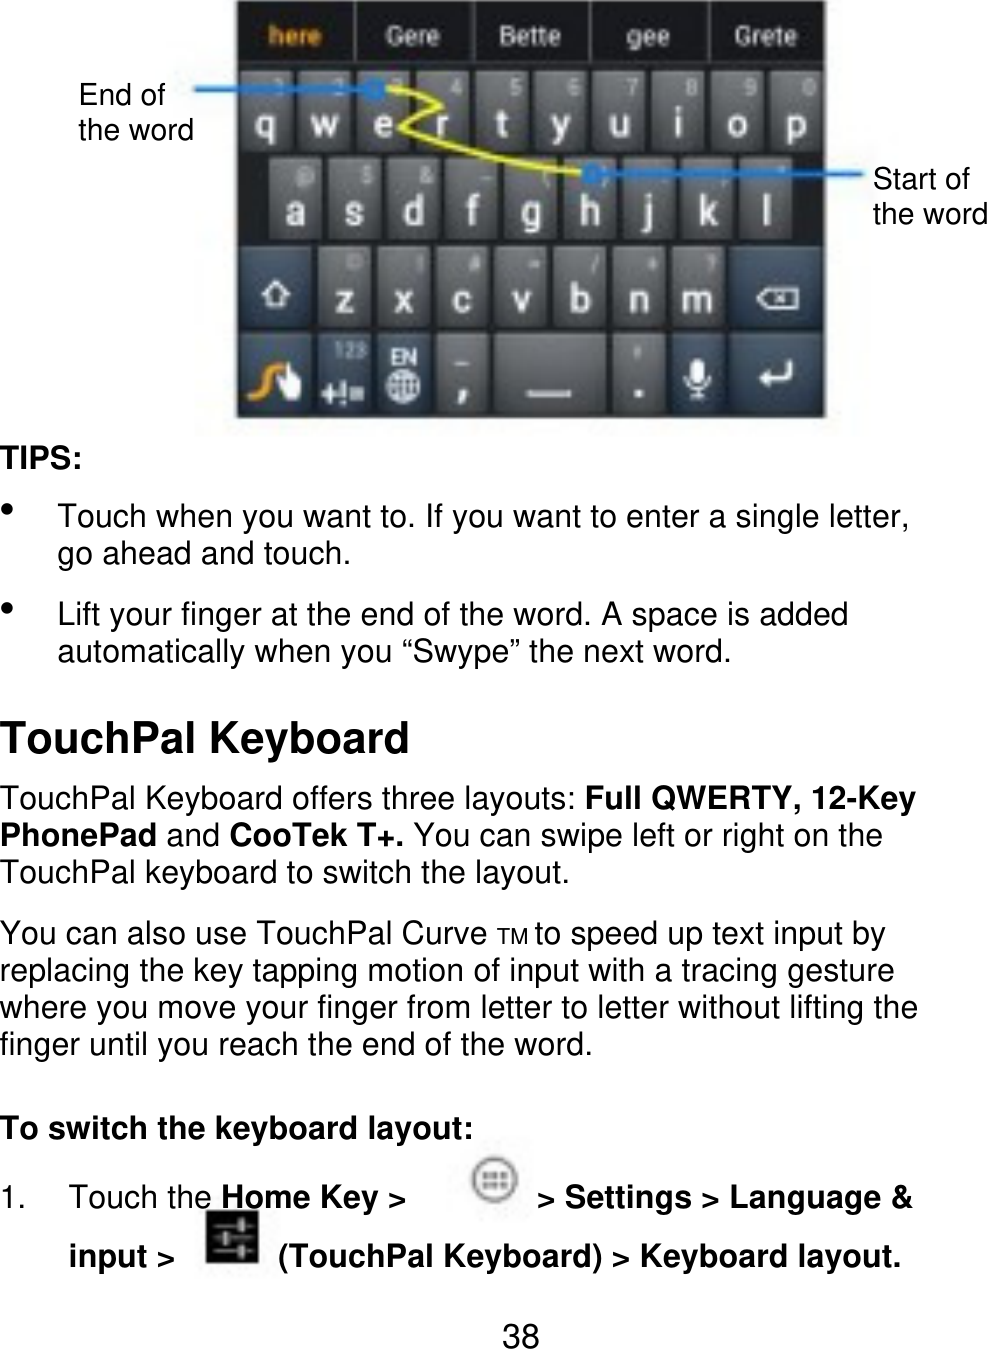 End of the word Start of the word TIPS:   Touch when you want to. If you want to enter a single letter, go ahead and touch. Lift your finger at the end of the word. A space is added automatically when you “Swype” the next word. TouchPal Keyboard TouchPal Keyboard offers three layouts: Full QWERTY, 12-Key PhonePad and CooTek T+. You can swipe left or right on the TouchPal keyboard to switch the layout. You can also use TouchPal Curve TM to speed up text input by replacing the key tapping motion of input with a tracing gesture where you move your finger from letter to letter without lifting the finger until you reach the end of the word. To switch the keyboard layout: 1. Touch the Home Key &gt; input &gt; &gt; Settings &gt; Language &amp; (TouchPal Keyboard) &gt; Keyboard layout. 38 